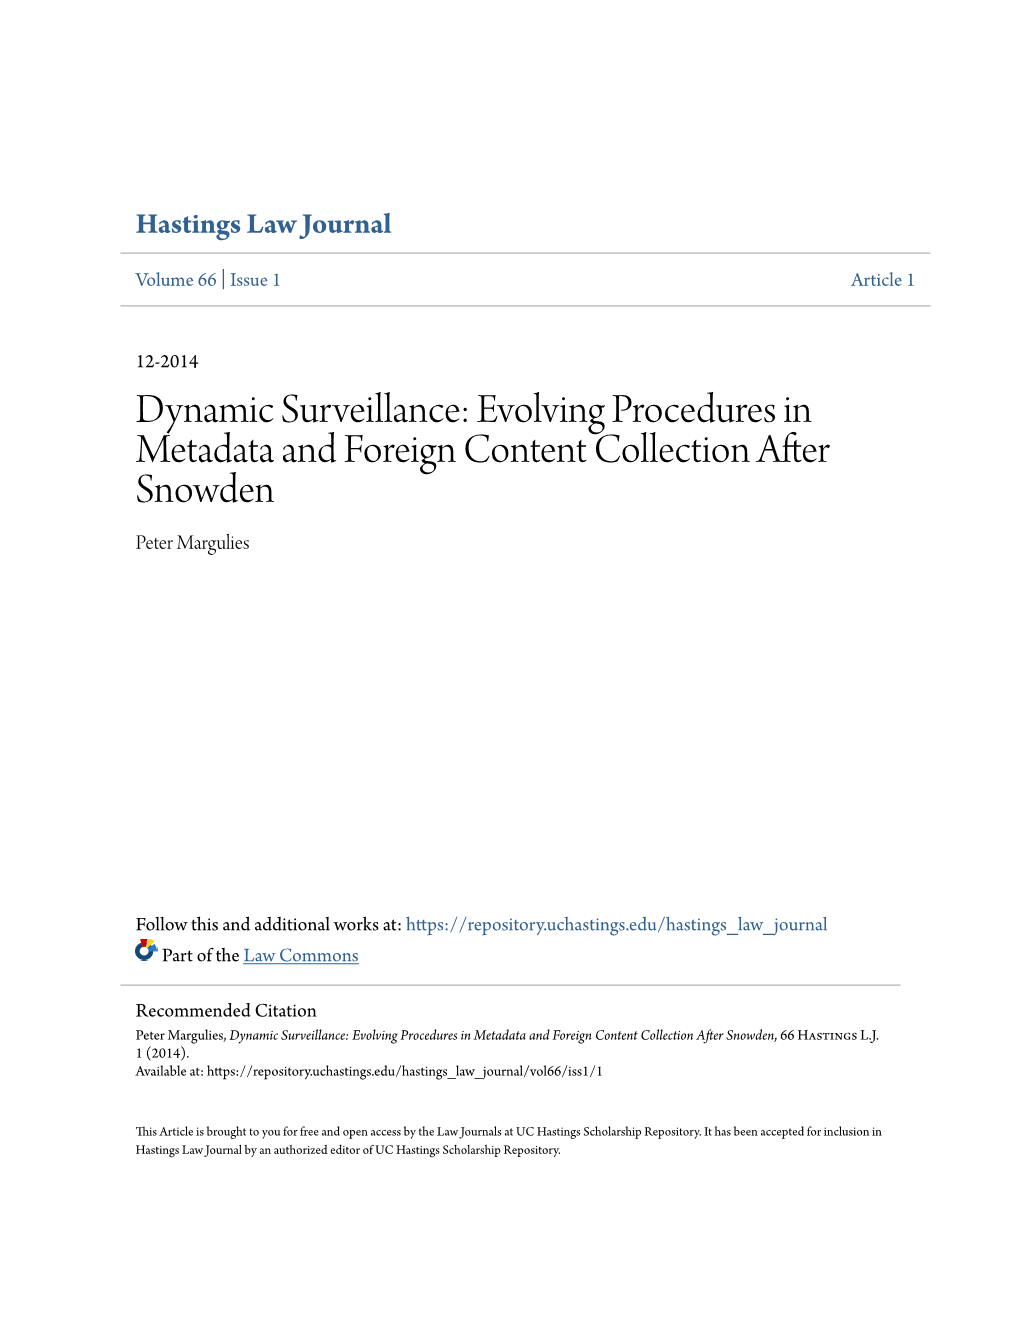 Dynamic Surveillance: Evolving Procedures in Metadata and Foreign Content Collection After Snowden Peter Margulies